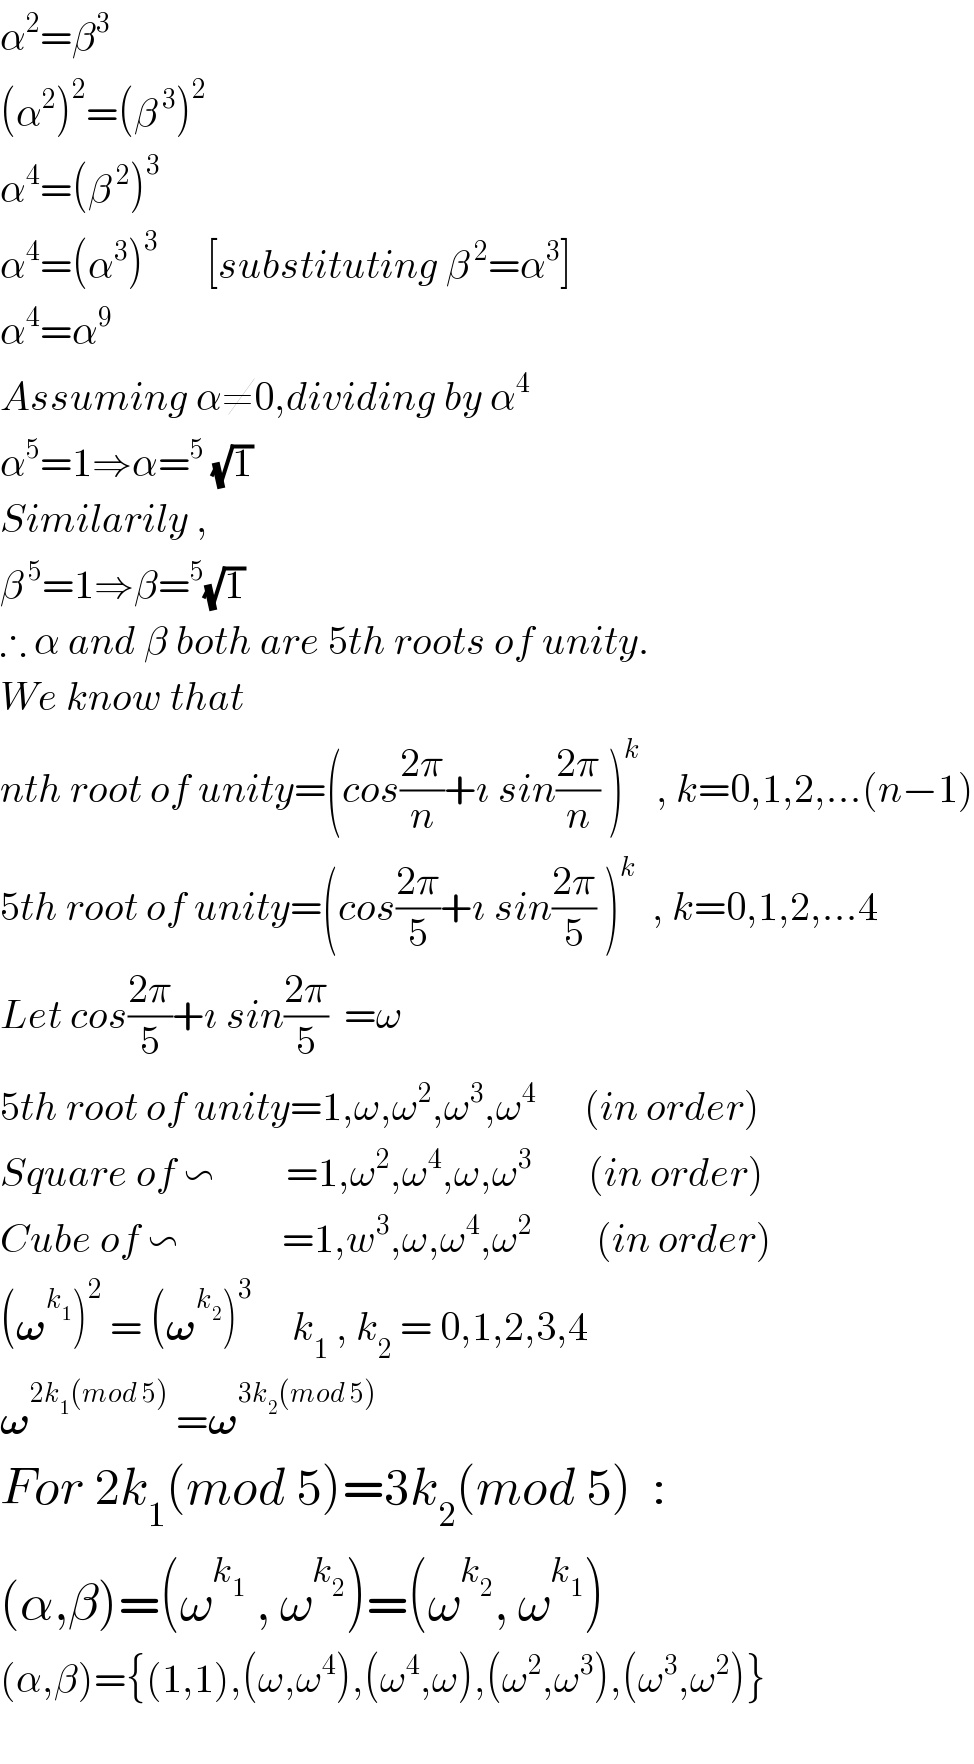 α^2 =β^3   (α^2 )^2 =(β^( 3) )^2   α^4 =(β^( 2) )^3   α^4 =(α^3 )^3       [substituting β^( 2) =α^3 ]  α^4 =α^9   Assuming α≠0,dividing by α^4   α^5 =1⇒α=^5  (√1)  Similarily ,  β^( 5) =1⇒β=^5 (√1)  ∴ α and β both are 5th roots of unity.  We know that   nth root of unity=(cos((2π)/n)+ı sin((2π)/n) )^k   , k=0,1,2,...(n−1)  5th root of unity=(cos((2π)/5)+ı sin((2π)/5) )^k   , k=0,1,2,...4  Let cos((2π)/5)+ı sin((2π)/5)  =ω  5th root of unity=1,ω,ω^2 ,ω^3 ,ω^4       (in order)  Square of ∽         =1,ω^2 ,ω^4 ,ω,ω^3        (in order)  Cube of ∽             =1,w^3 ,ω,ω^4 ,ω^2         (in order)  (𝛚^k_1  )^2  = (𝛚^k_2  )^3      k_1  , k_2  = 0,1,2,3,4  𝛚^(2k_1 (mod 5))  =𝛚^(3k_2 (mod 5))   For 2k_1 (mod 5)=3k_2 (mod 5)  :  (α,β)=(ω^k_1   , ω^k_2  )=(ω^k_2  , ω^k_1  )  (α,β)={(1,1),(ω,ω^4 ),(ω^4 ,ω),(ω^2 ,ω^3 ),(ω^3 ,ω^2 )}    